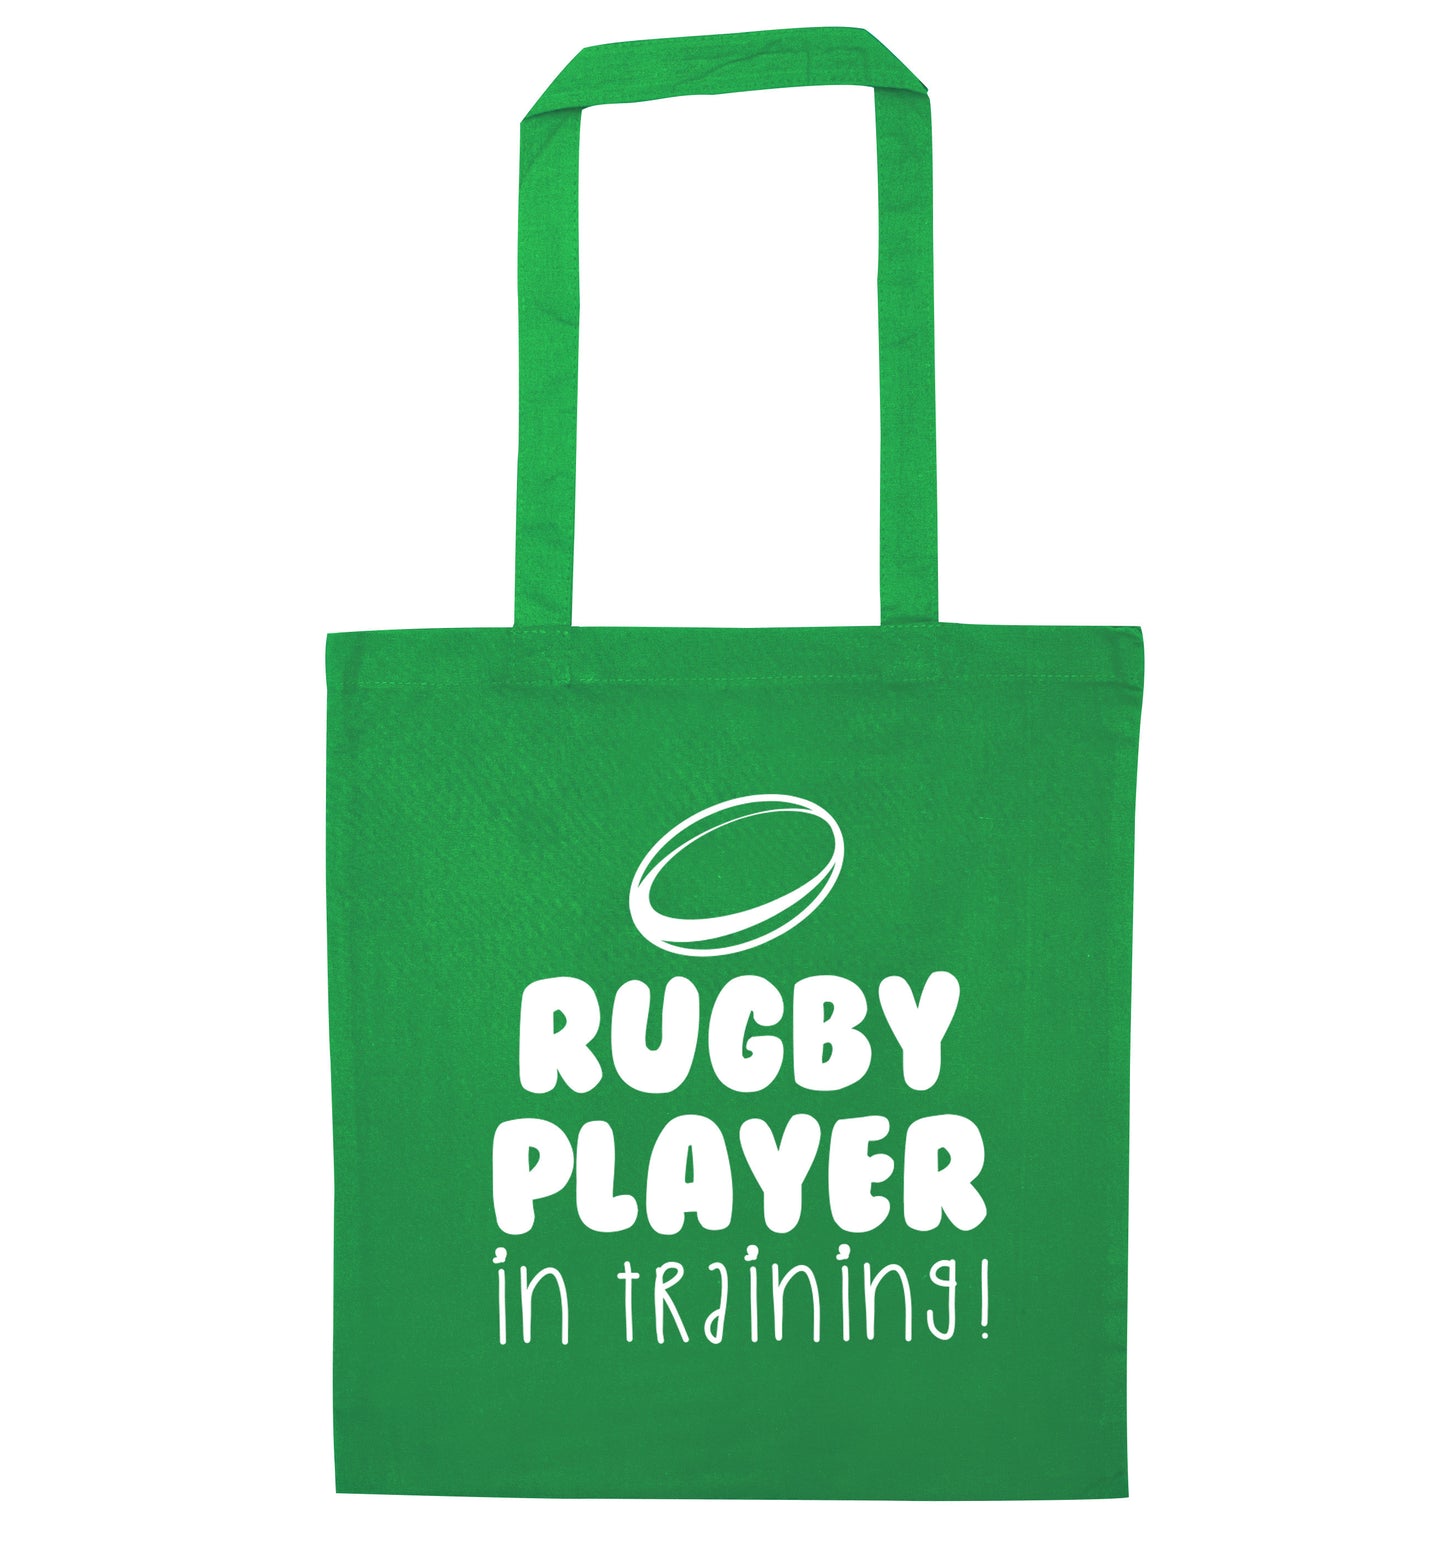 Rugby player in training green tote bag